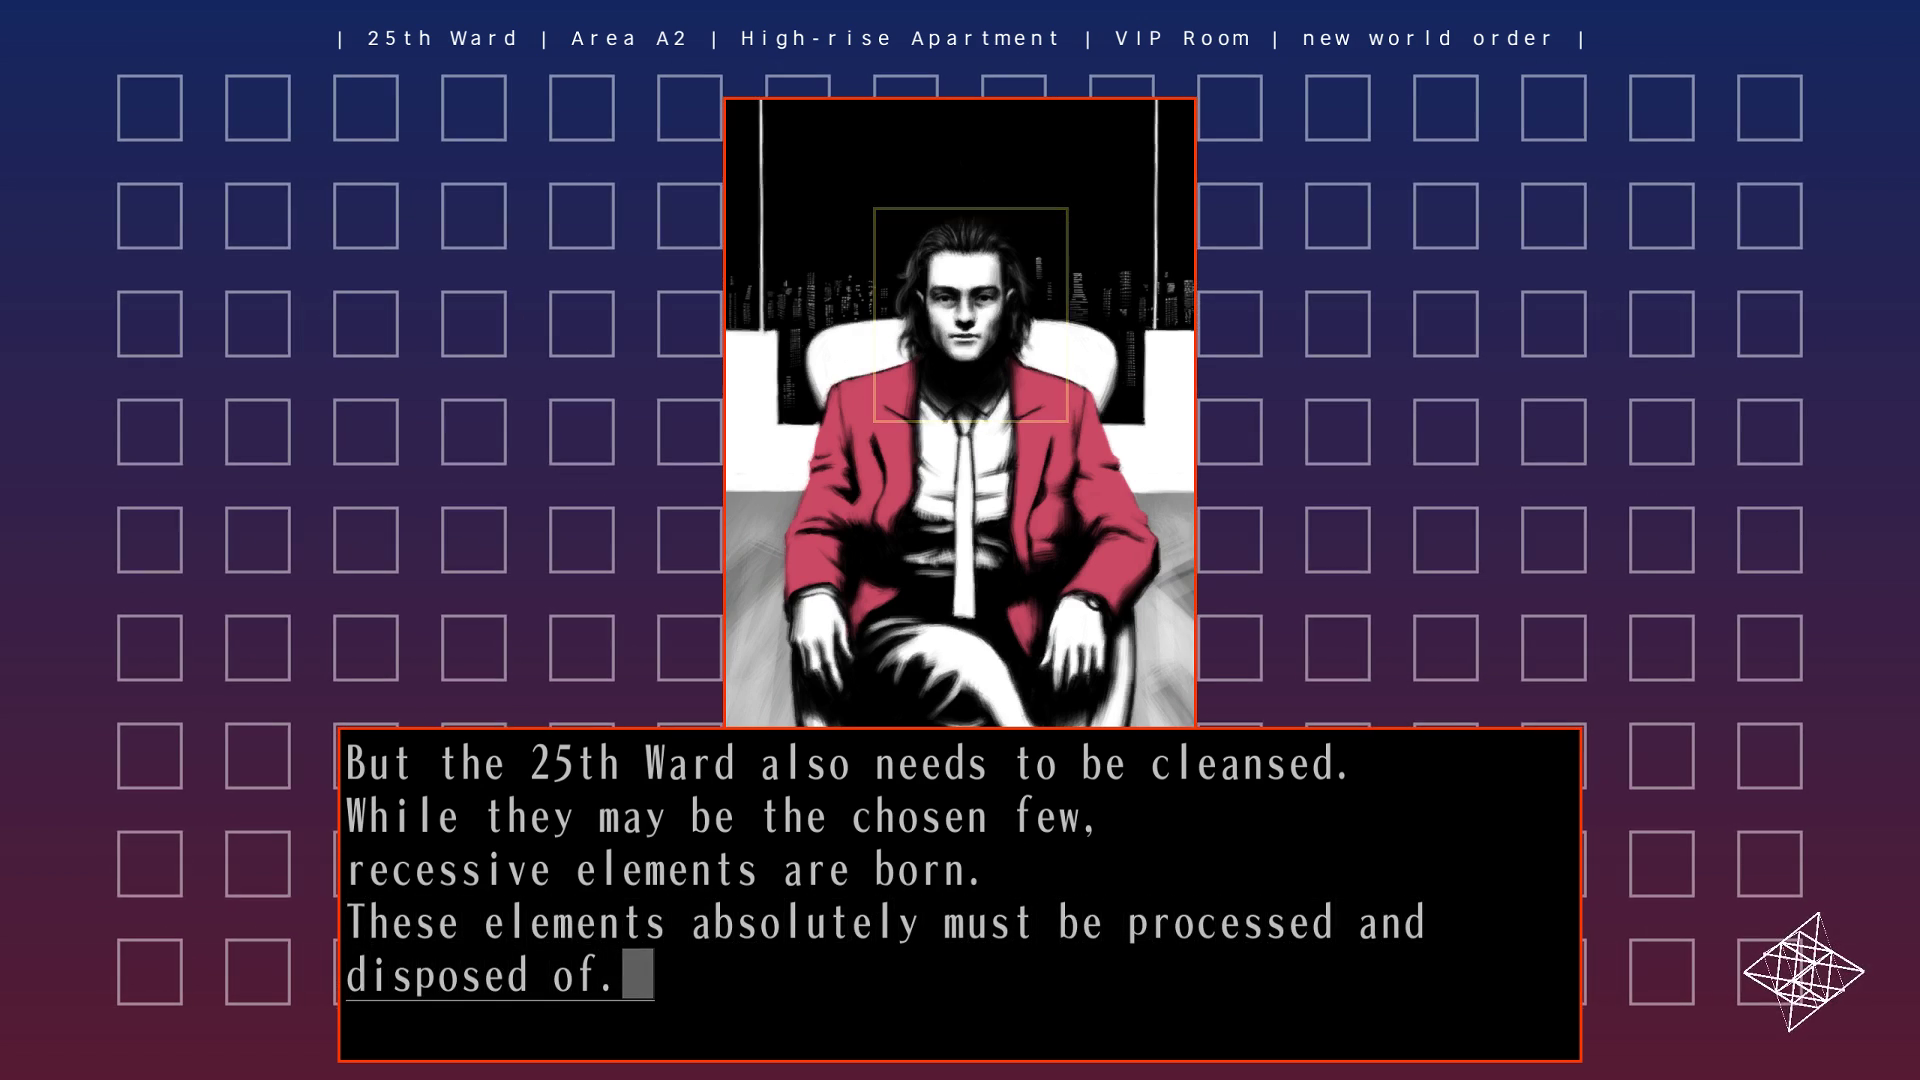 Screenshot from "new world order." Nakane Kinshiro, a man with messy long hair wearing a necktie and red jacket, sits with his back to the city skyline at night. There is not a star in the sky. He says, "But the 25th Ward also needs to be cleansed. While they may be the chosen few, recessive elements are born. These elements must be disposed of."